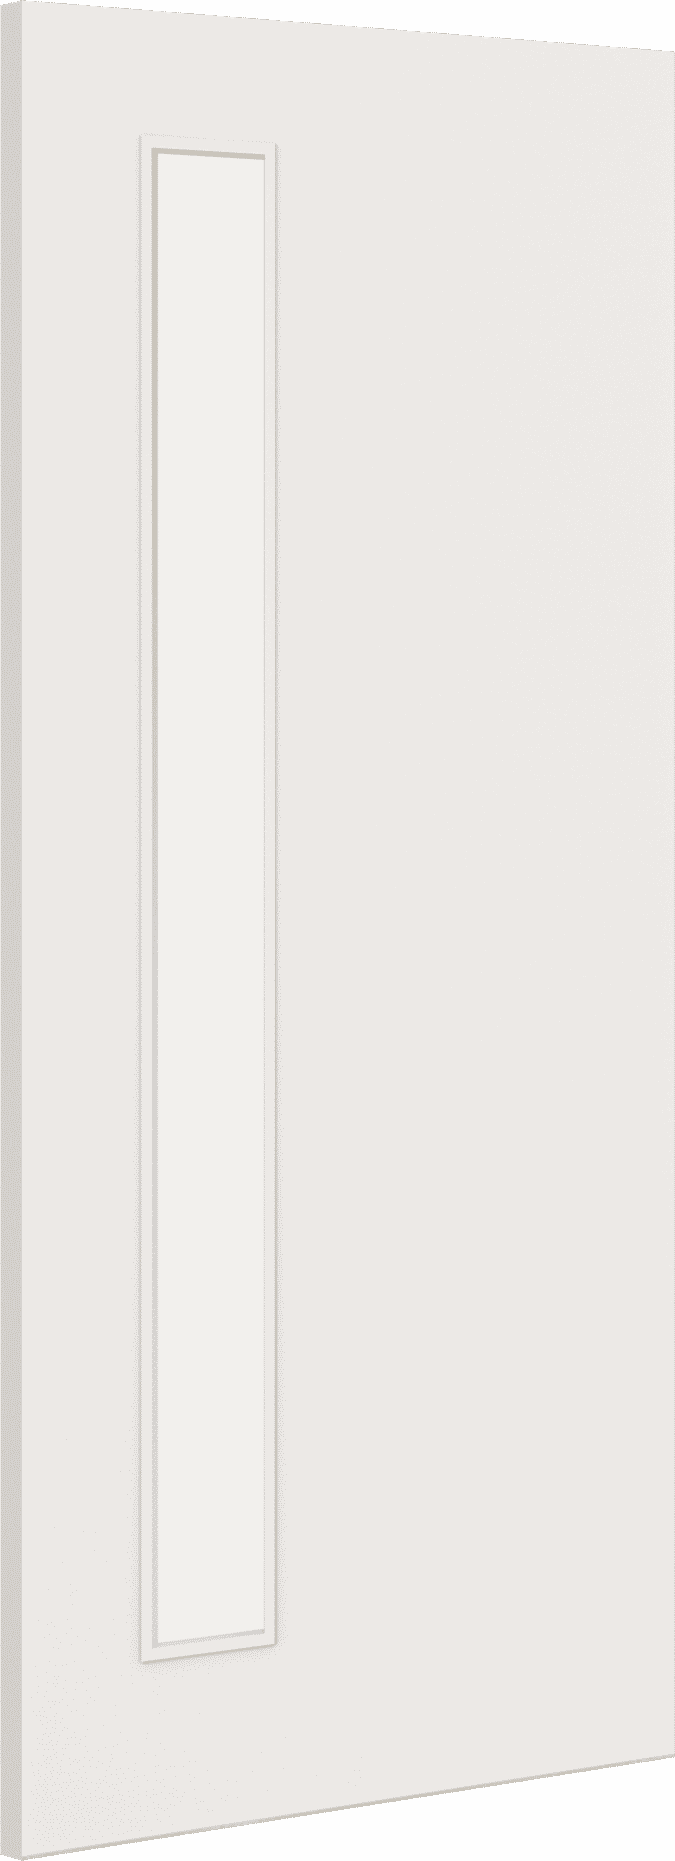 2040mm x 826mm x 44mm Architectural Paint Grade White 06 Frosted Glazed Fire Door Blank